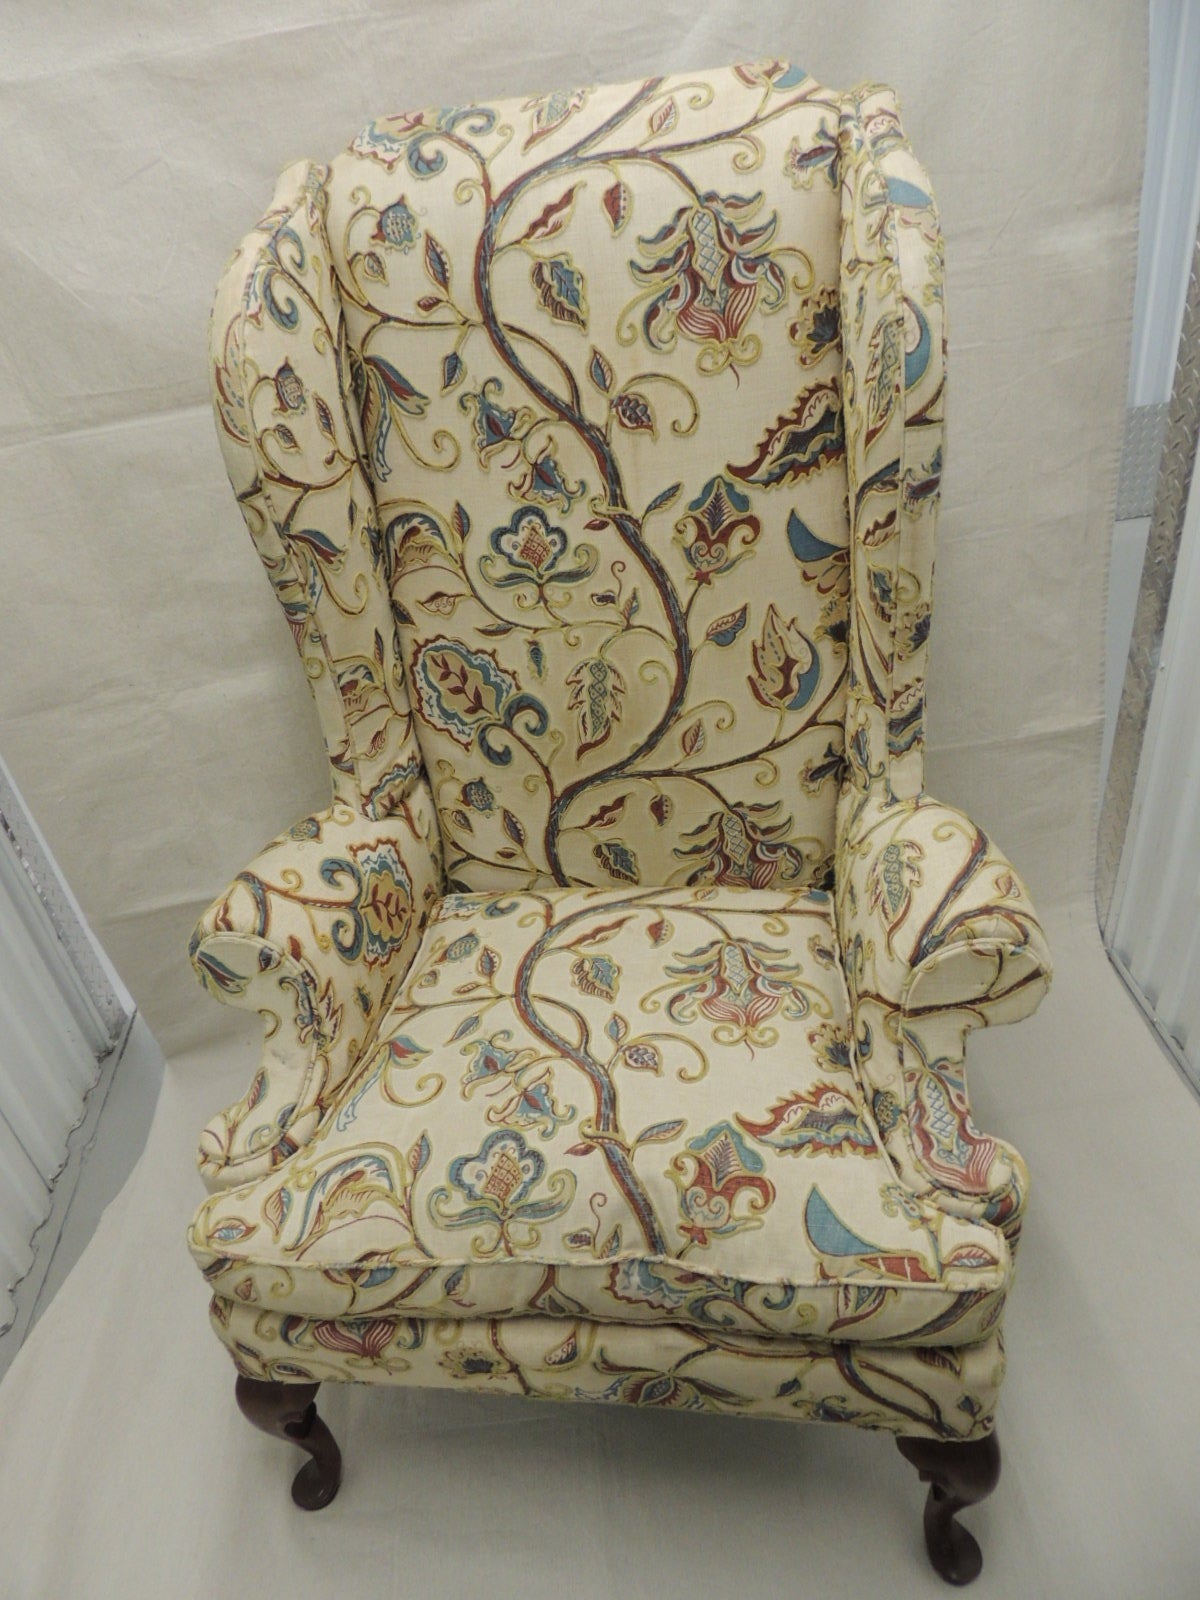 Fantastic George I style embroidery linen crewel work upholster wing chair (original upholstery). The silk antique moss green velvet back was recently done. The new loose cushion filler (zipper) is feather/down. Rolled arm with curved back. In